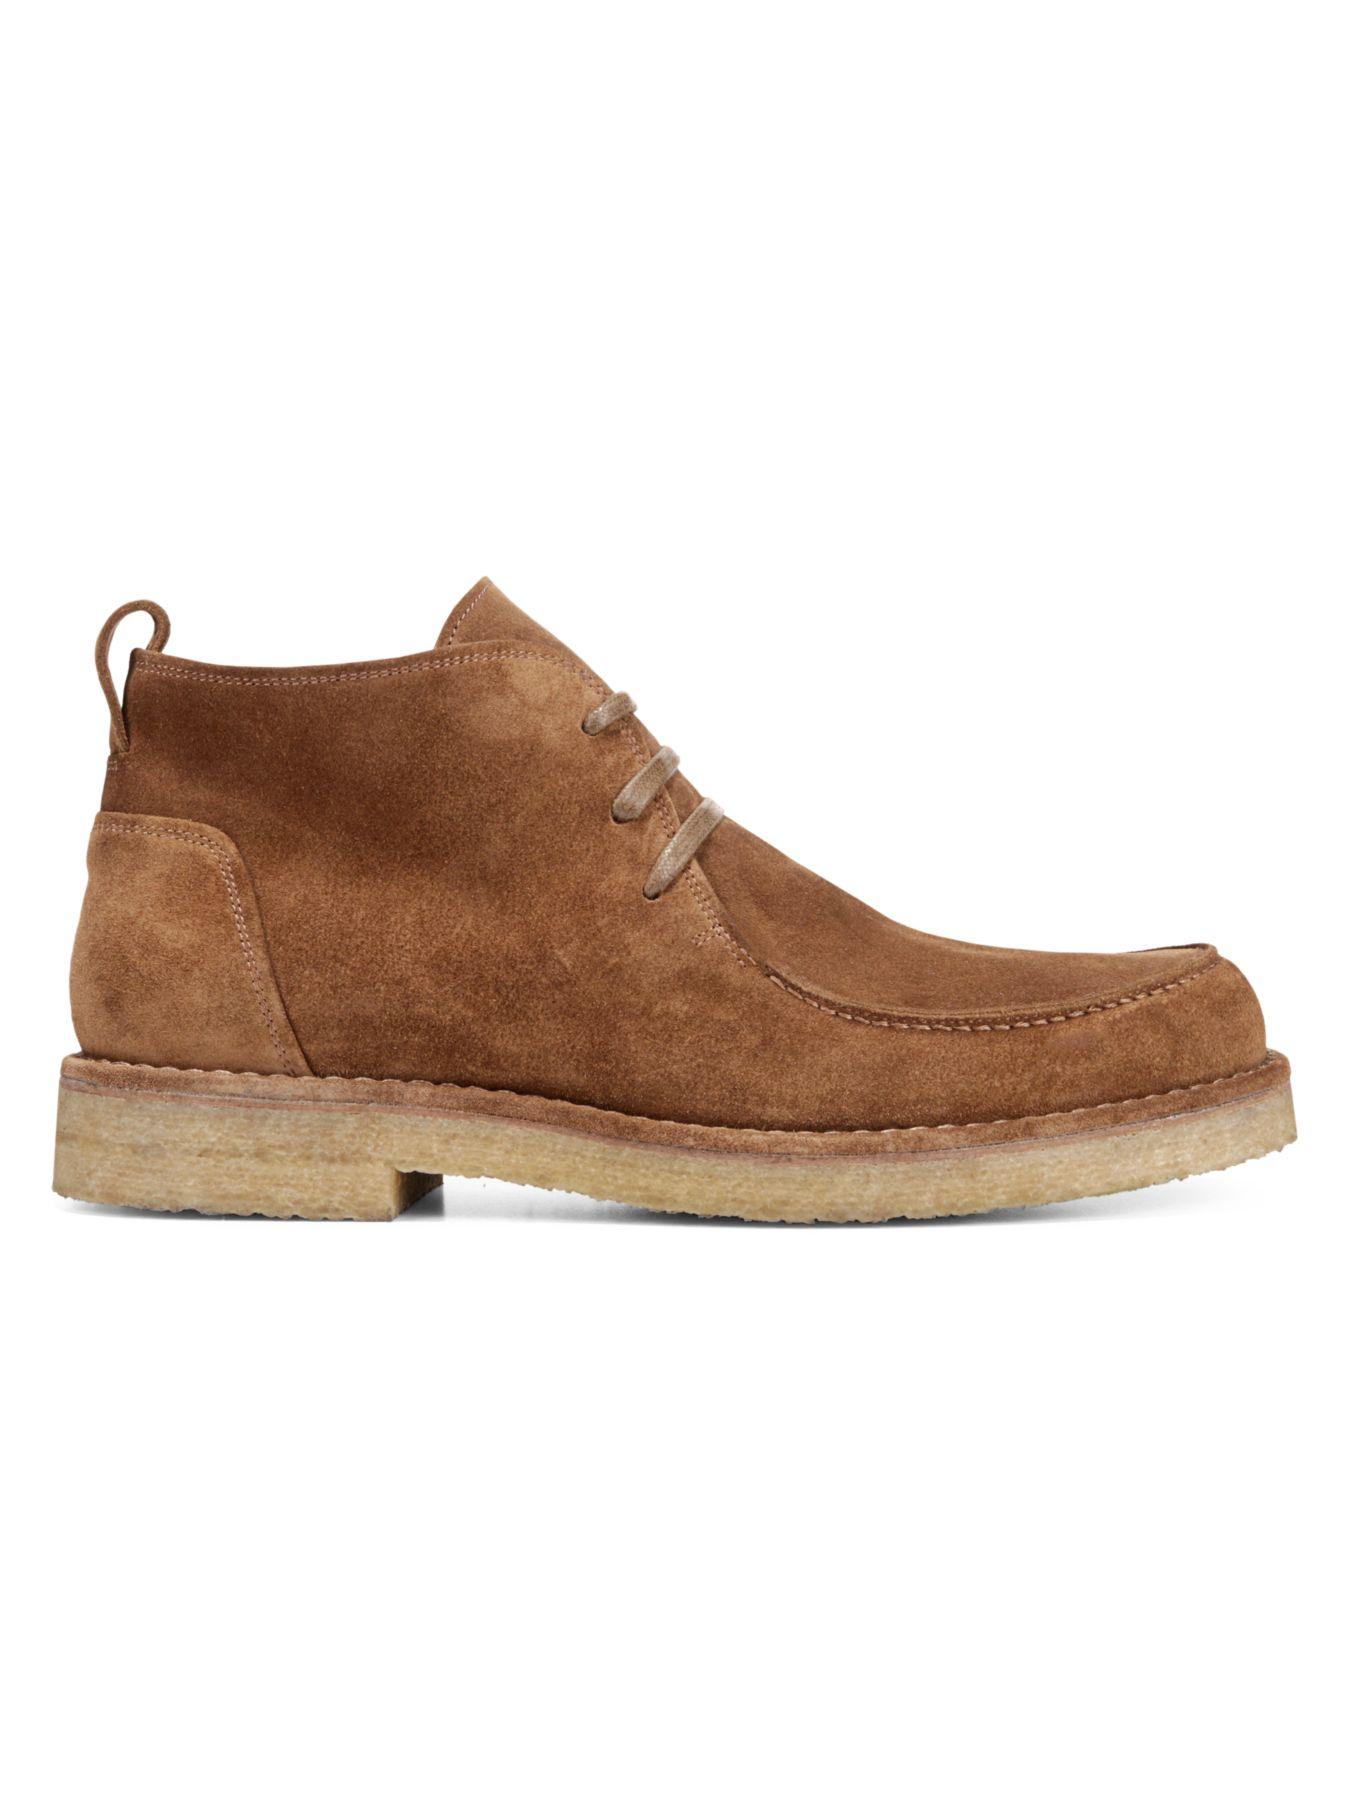 Vince Suede Men's Colter Moc-toe Chukka Boots in Tobacco (Brown) for ...